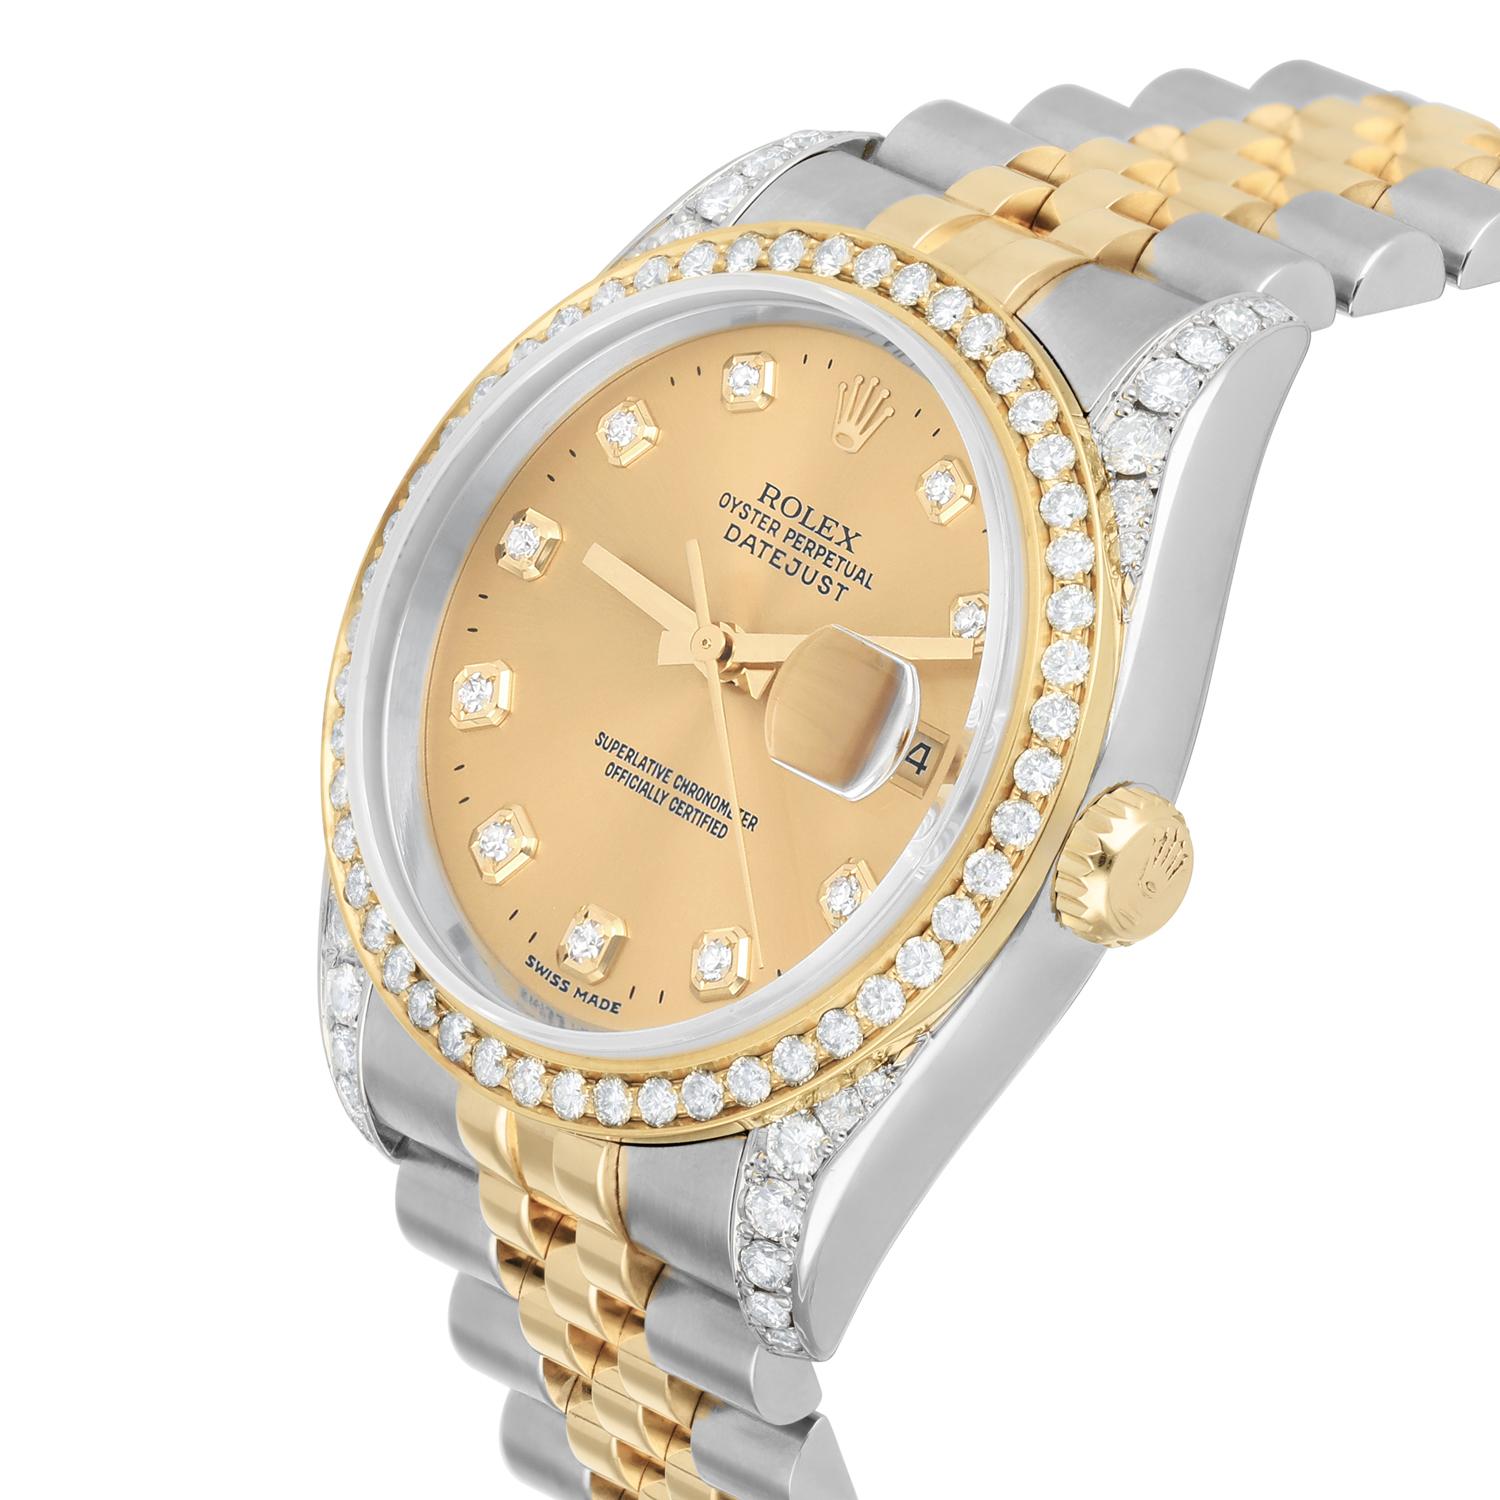 Rolex Datejust 36 Gold & Steel 116233 Watch Champagne Dial Jubilee Watch Diamond In Excellent Condition For Sale In New York, NY